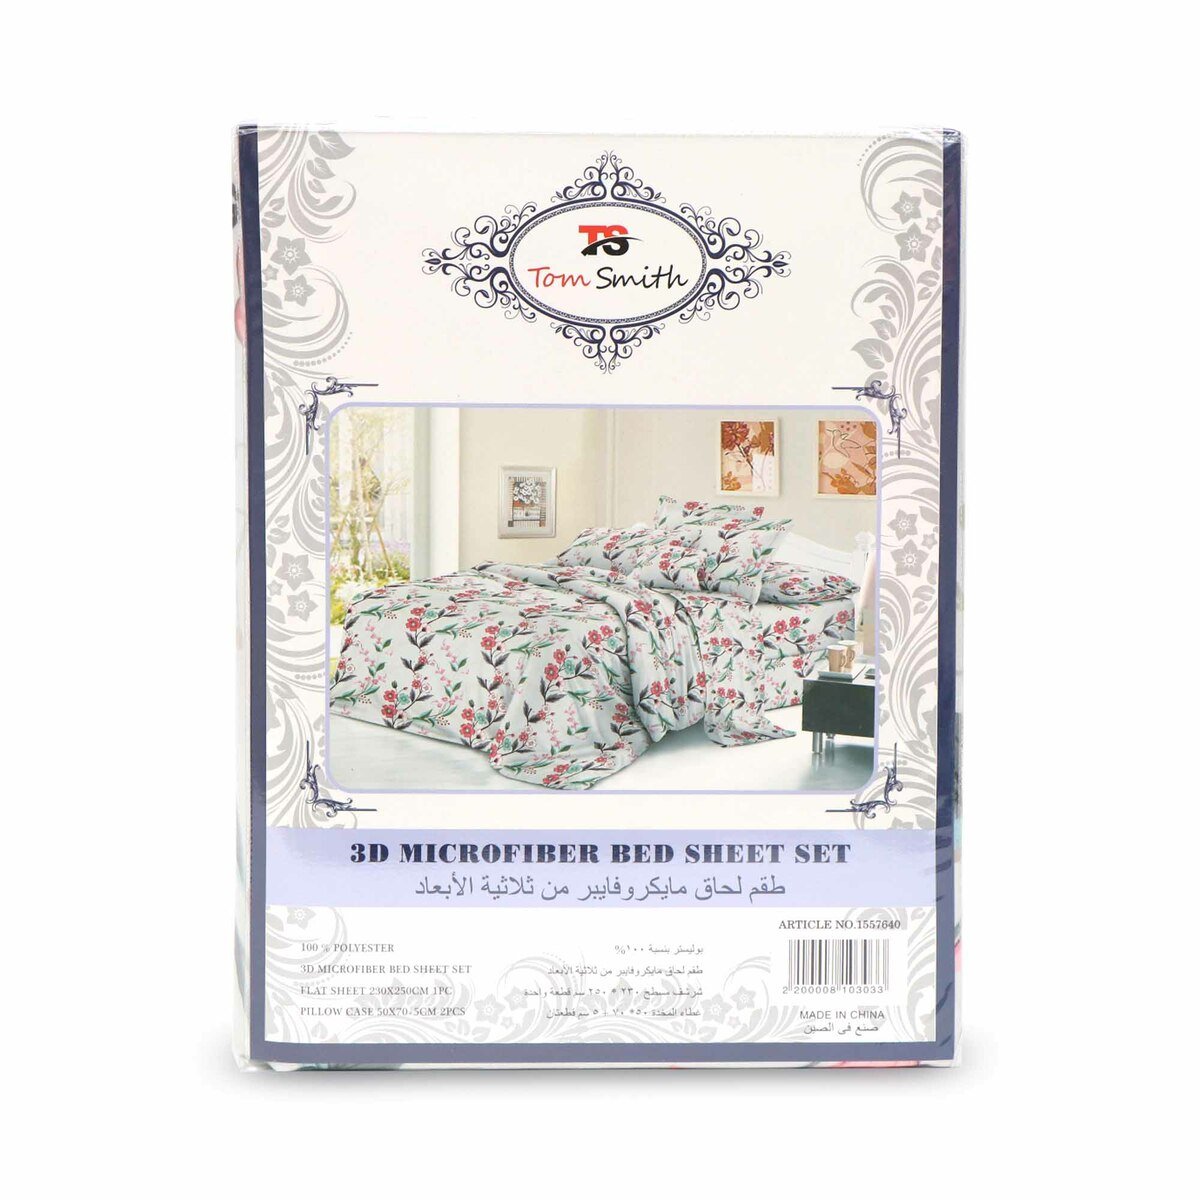 Tom Smith Bed Sheet Size: 230x250cm 1pc + Pillow Cover Size: 50x70cm White & Red